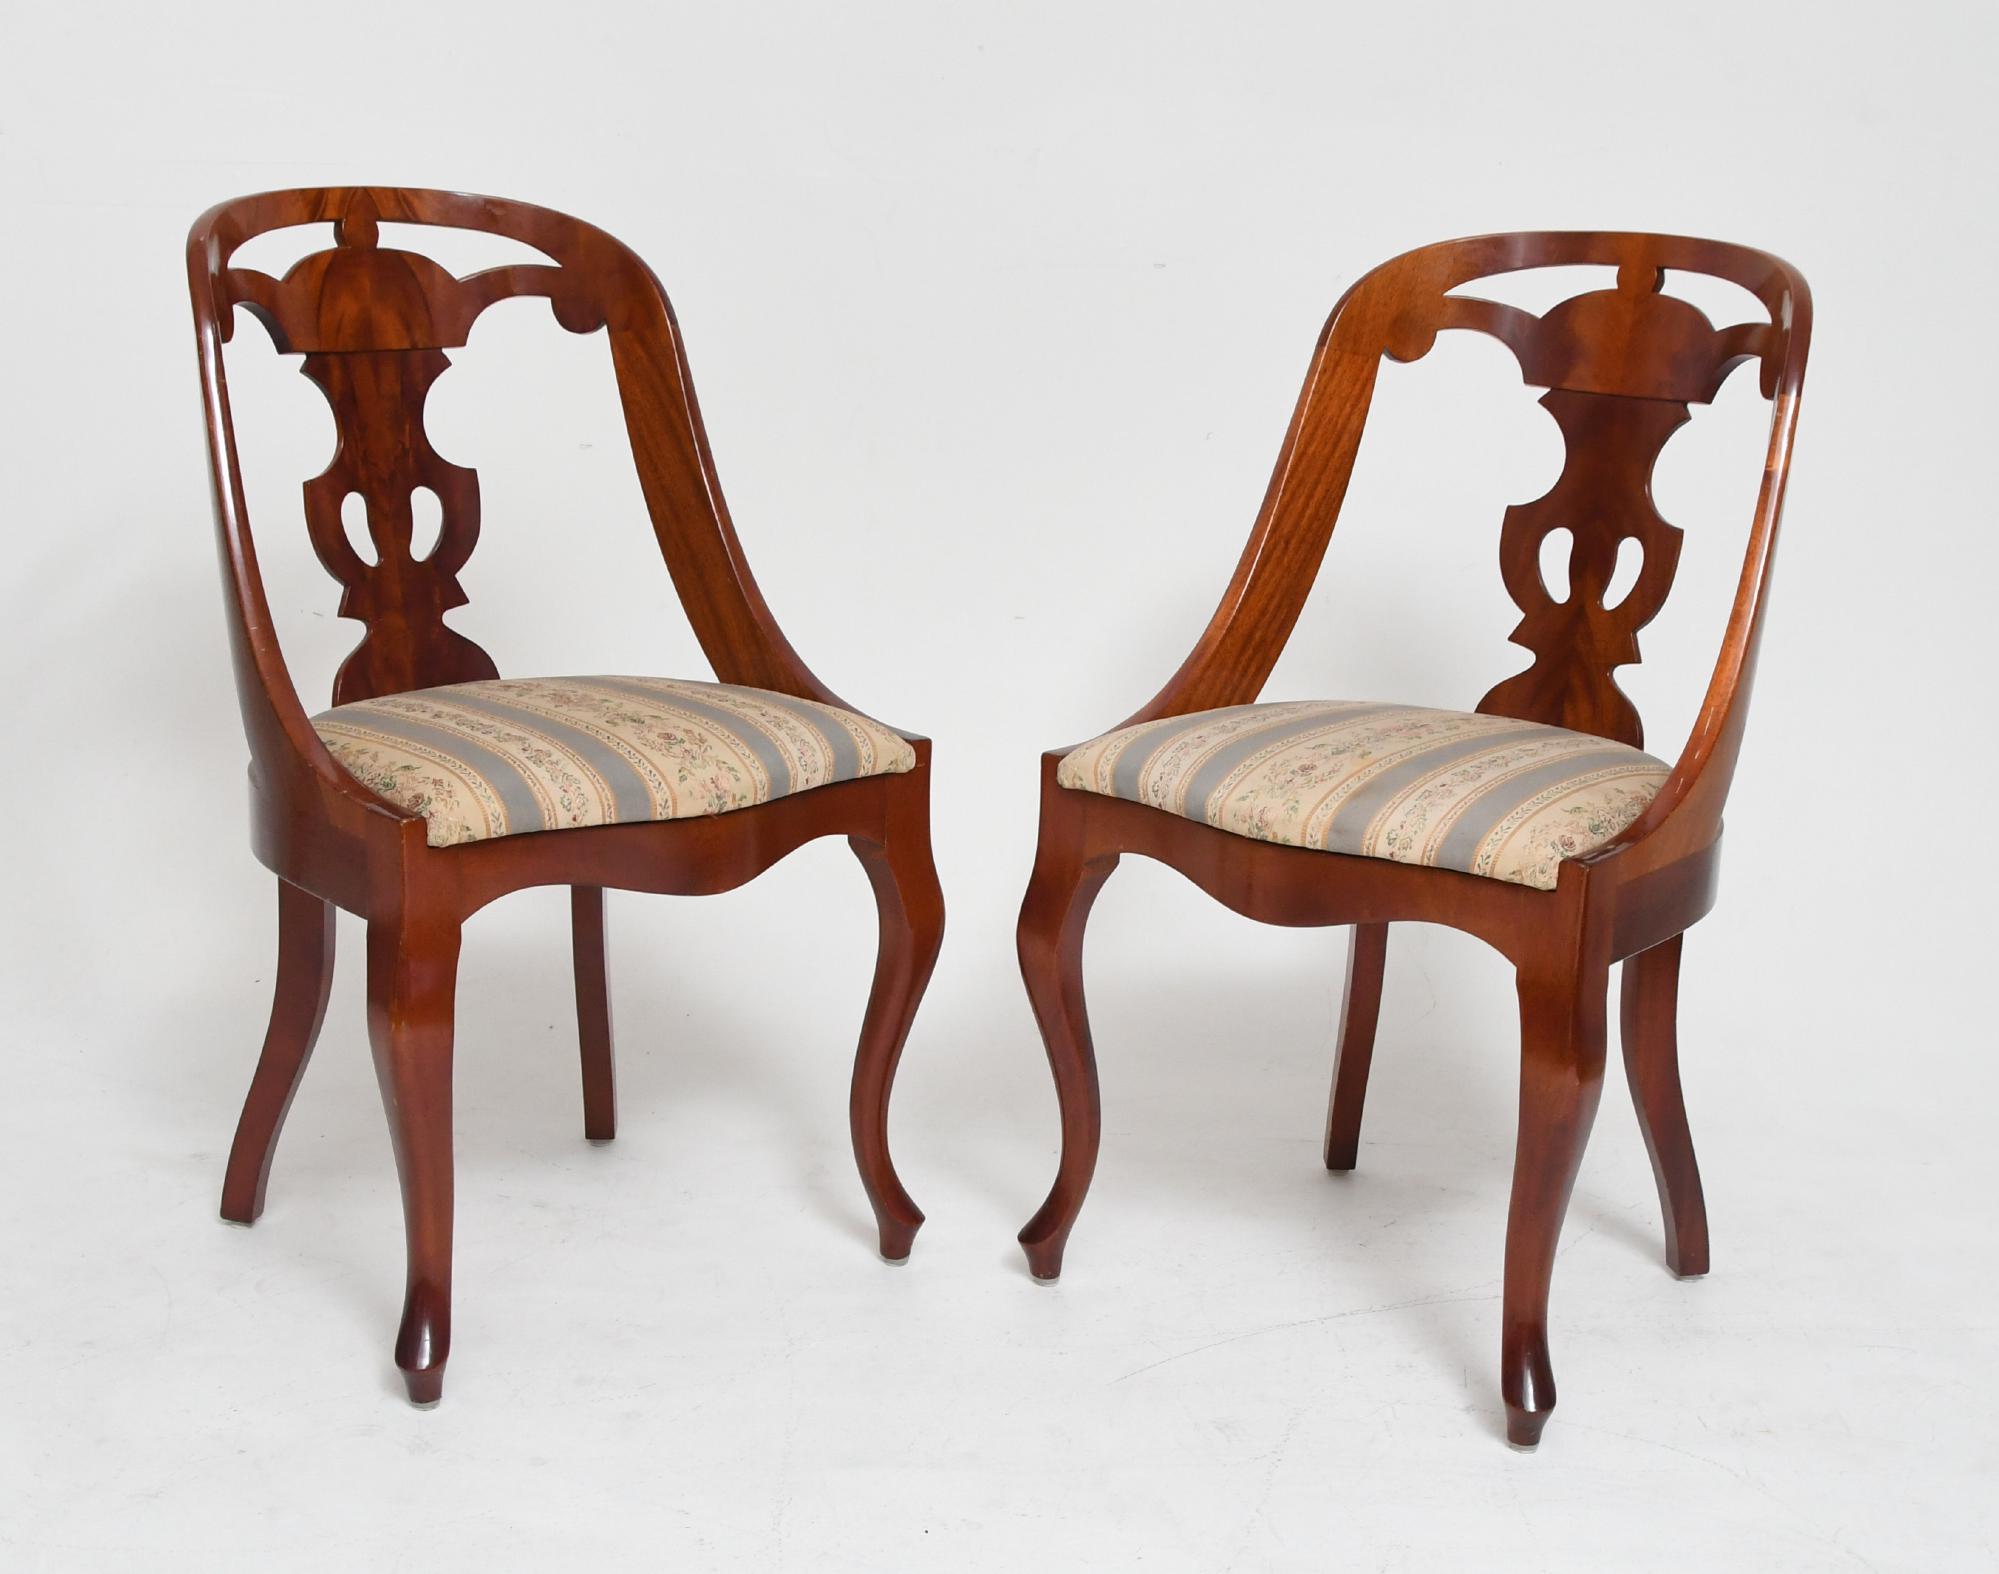 Charming Pair of 1800s Göteborg Dining Chairs